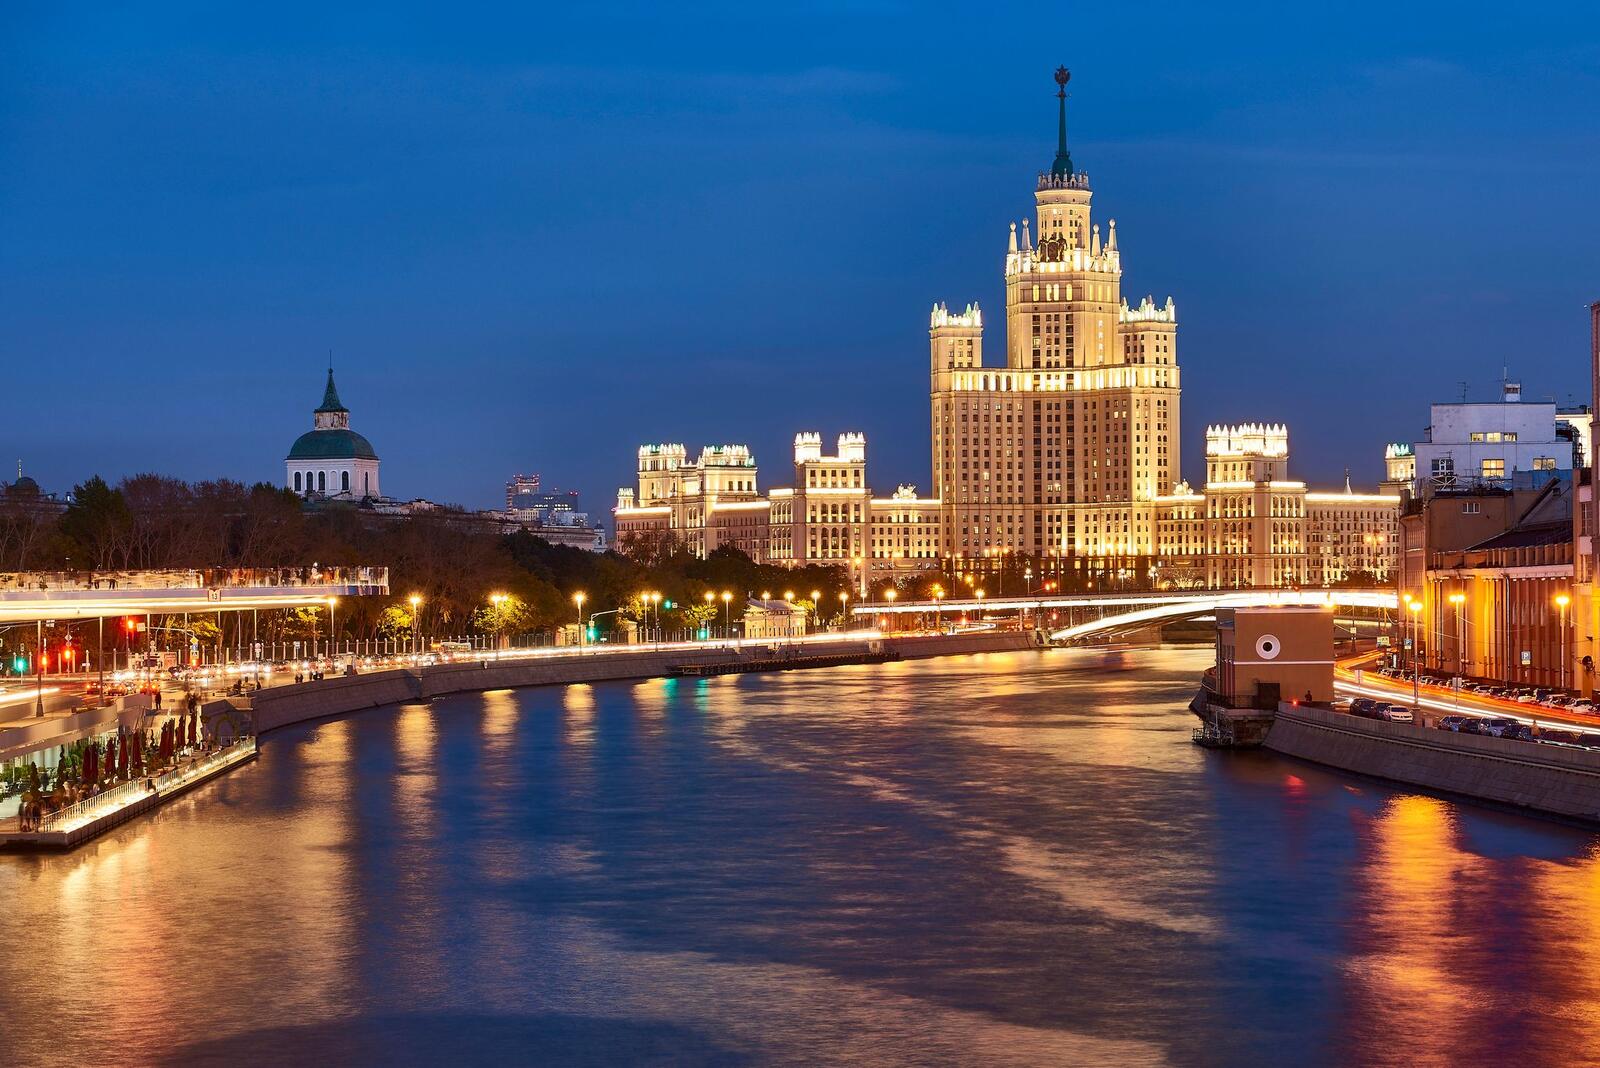 Wallpapers The building of Kotelnicheskaya embankment Moscow Russia on the desktop